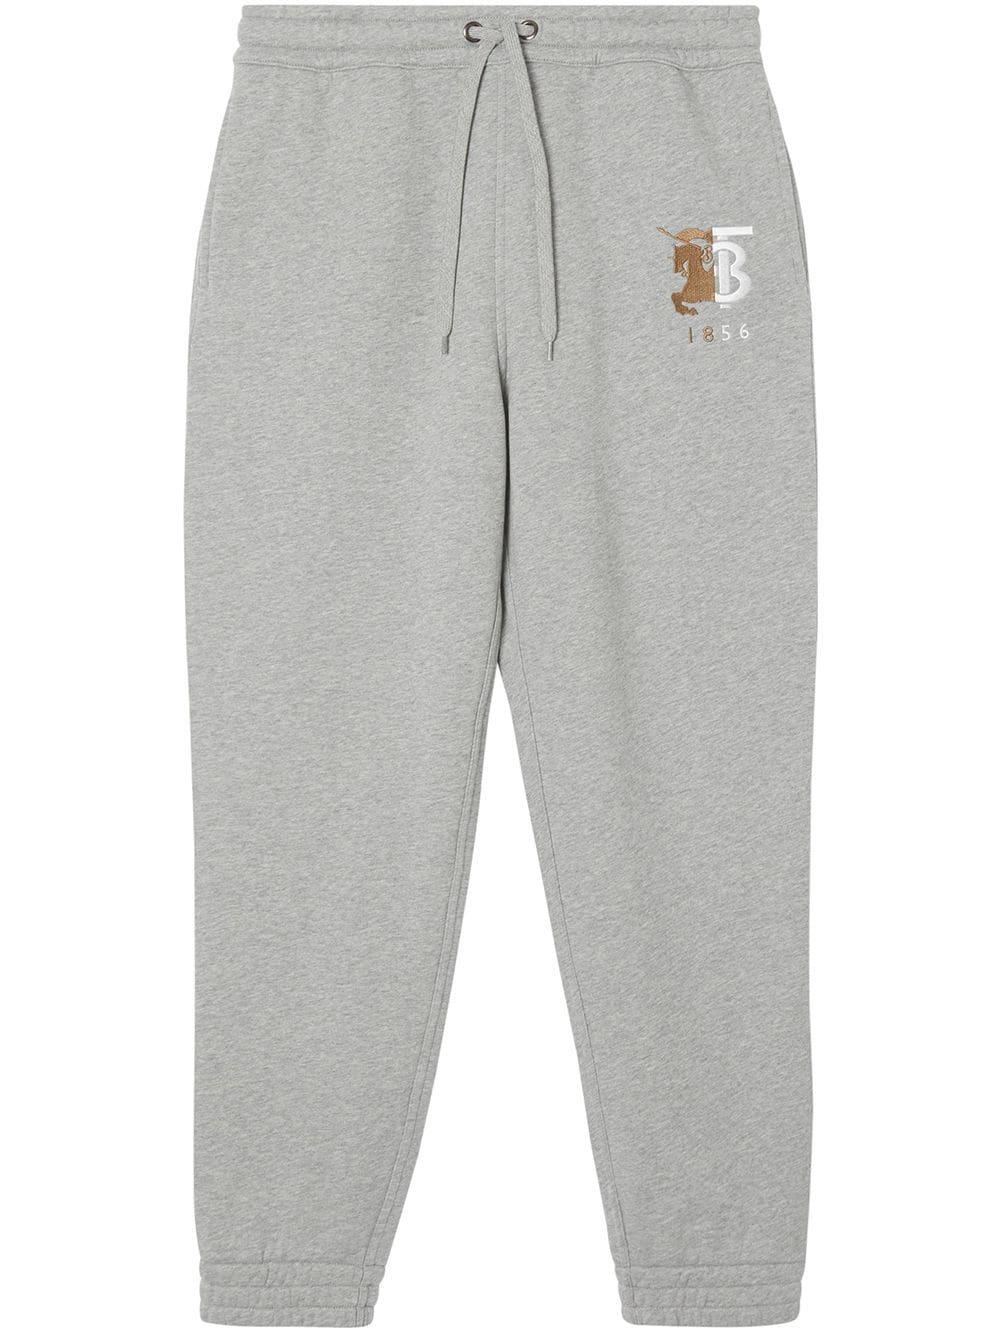 Burberry Cotton Contrast Logo Track Pants in Grey (Gray) for Men - Lyst